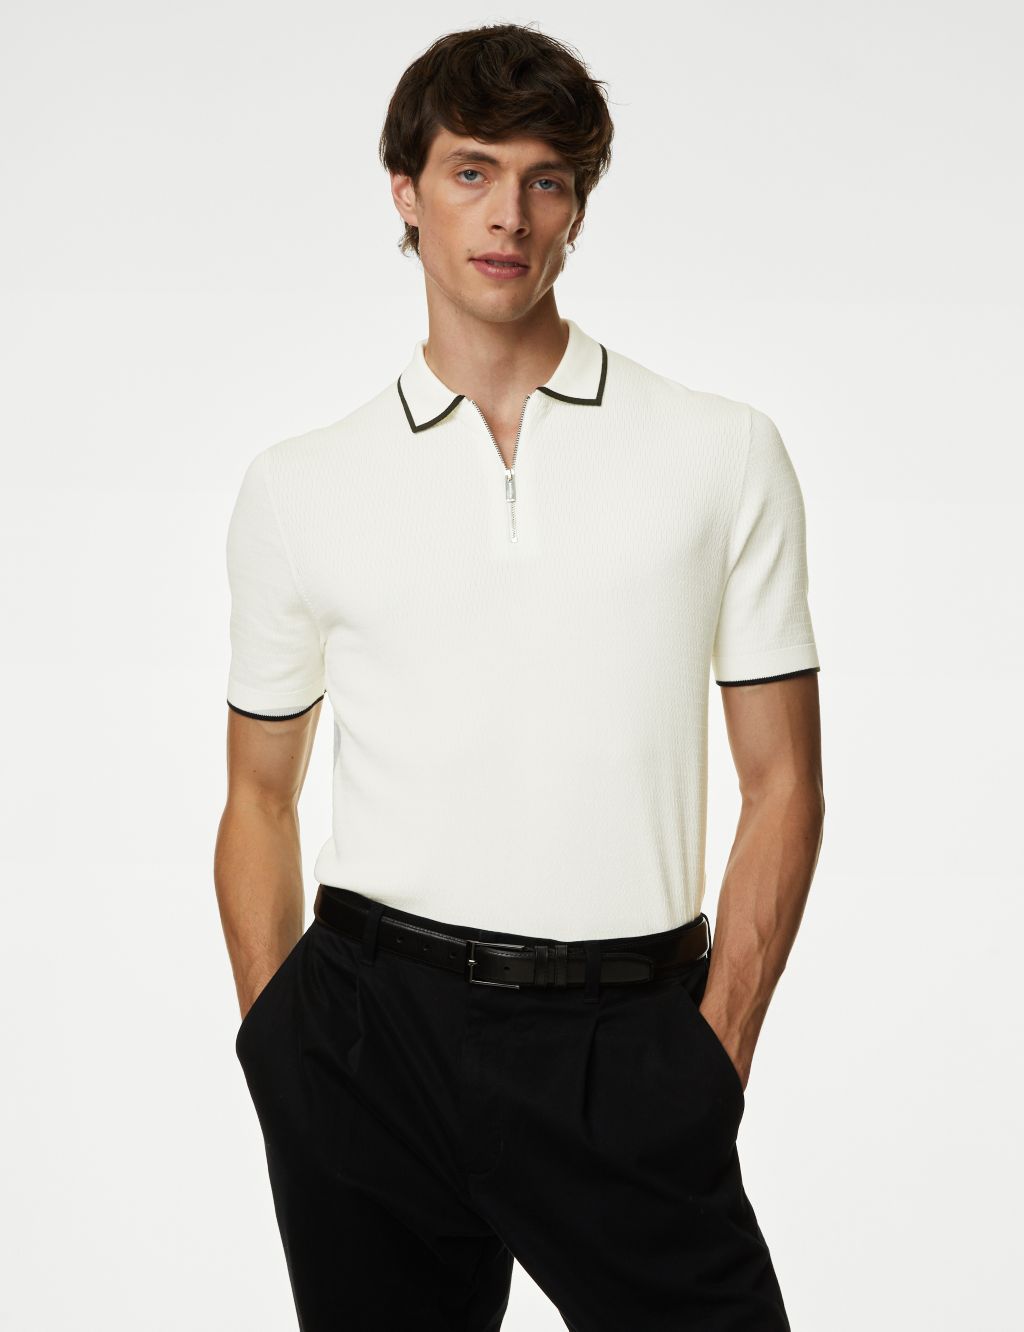 Cotton Blend Textured Knitted Polo Shirt image 4